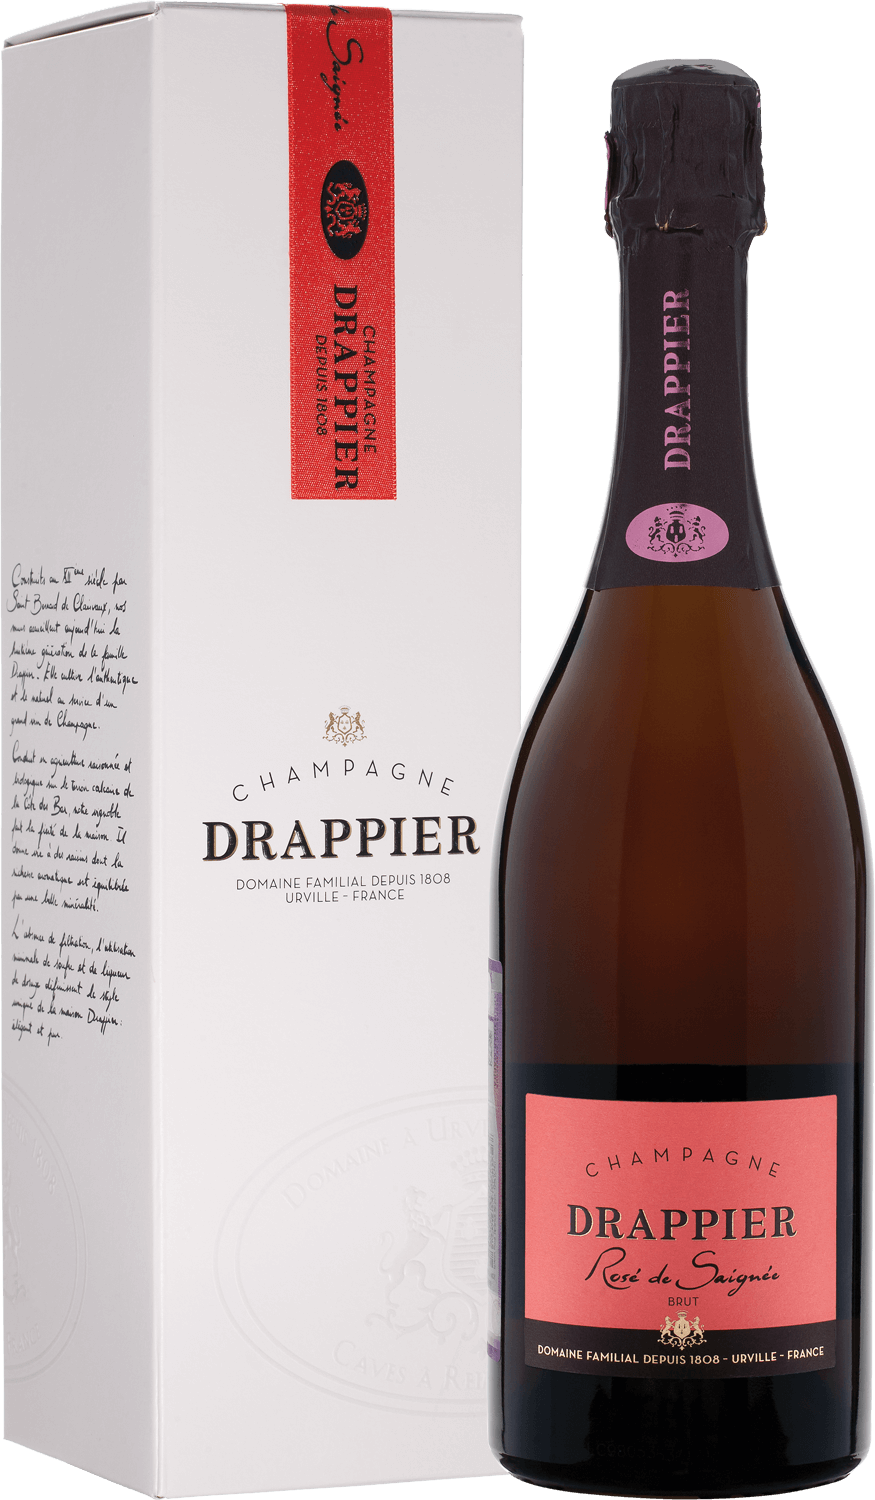 Drappier Brut Rose Champagne AOP in gift box pommery brut rose royal champagne aop gift box